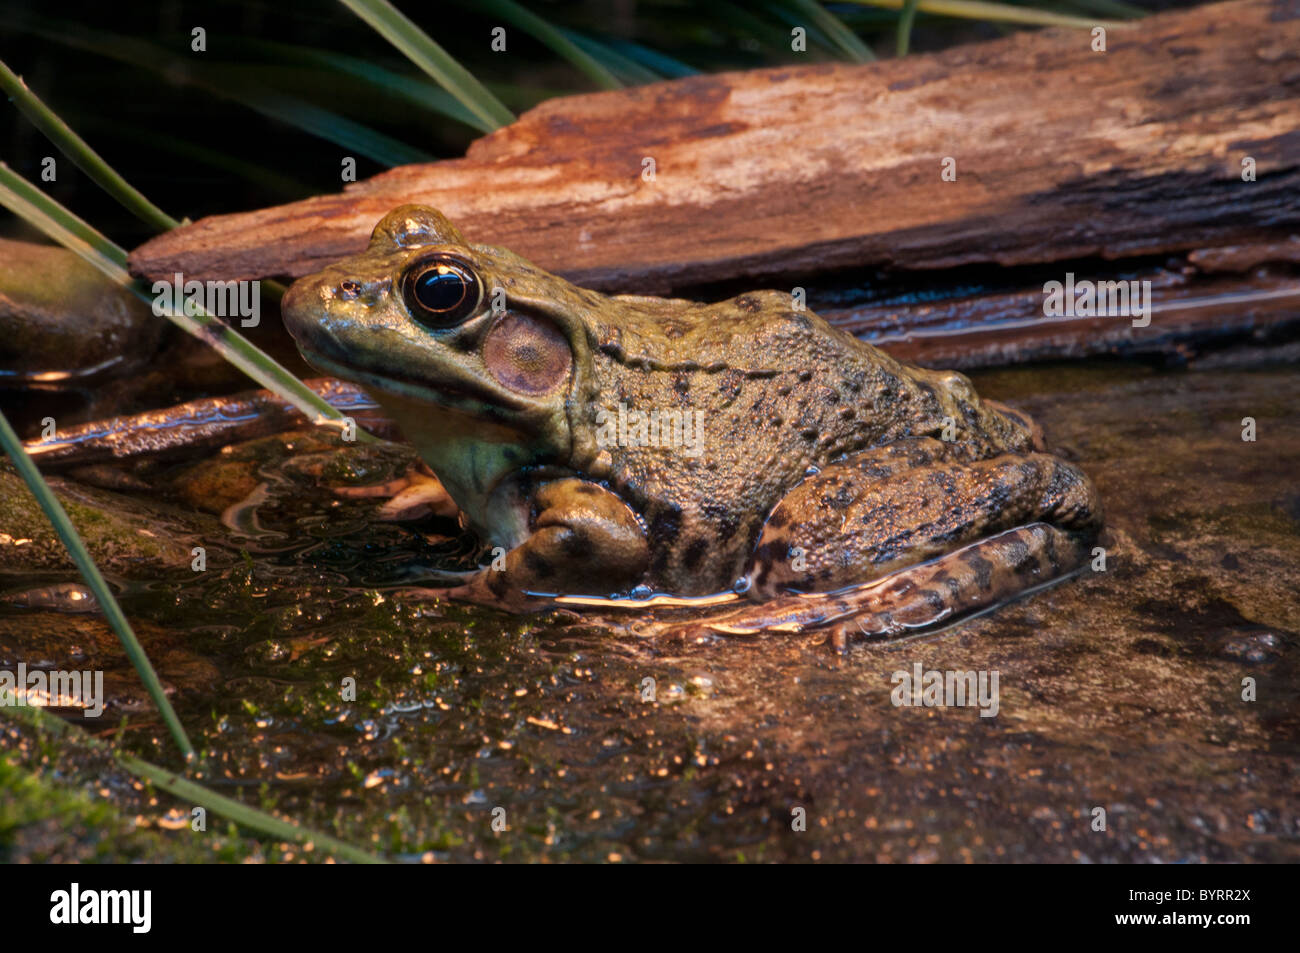 Close-up of a Green Frog. Stock Photo